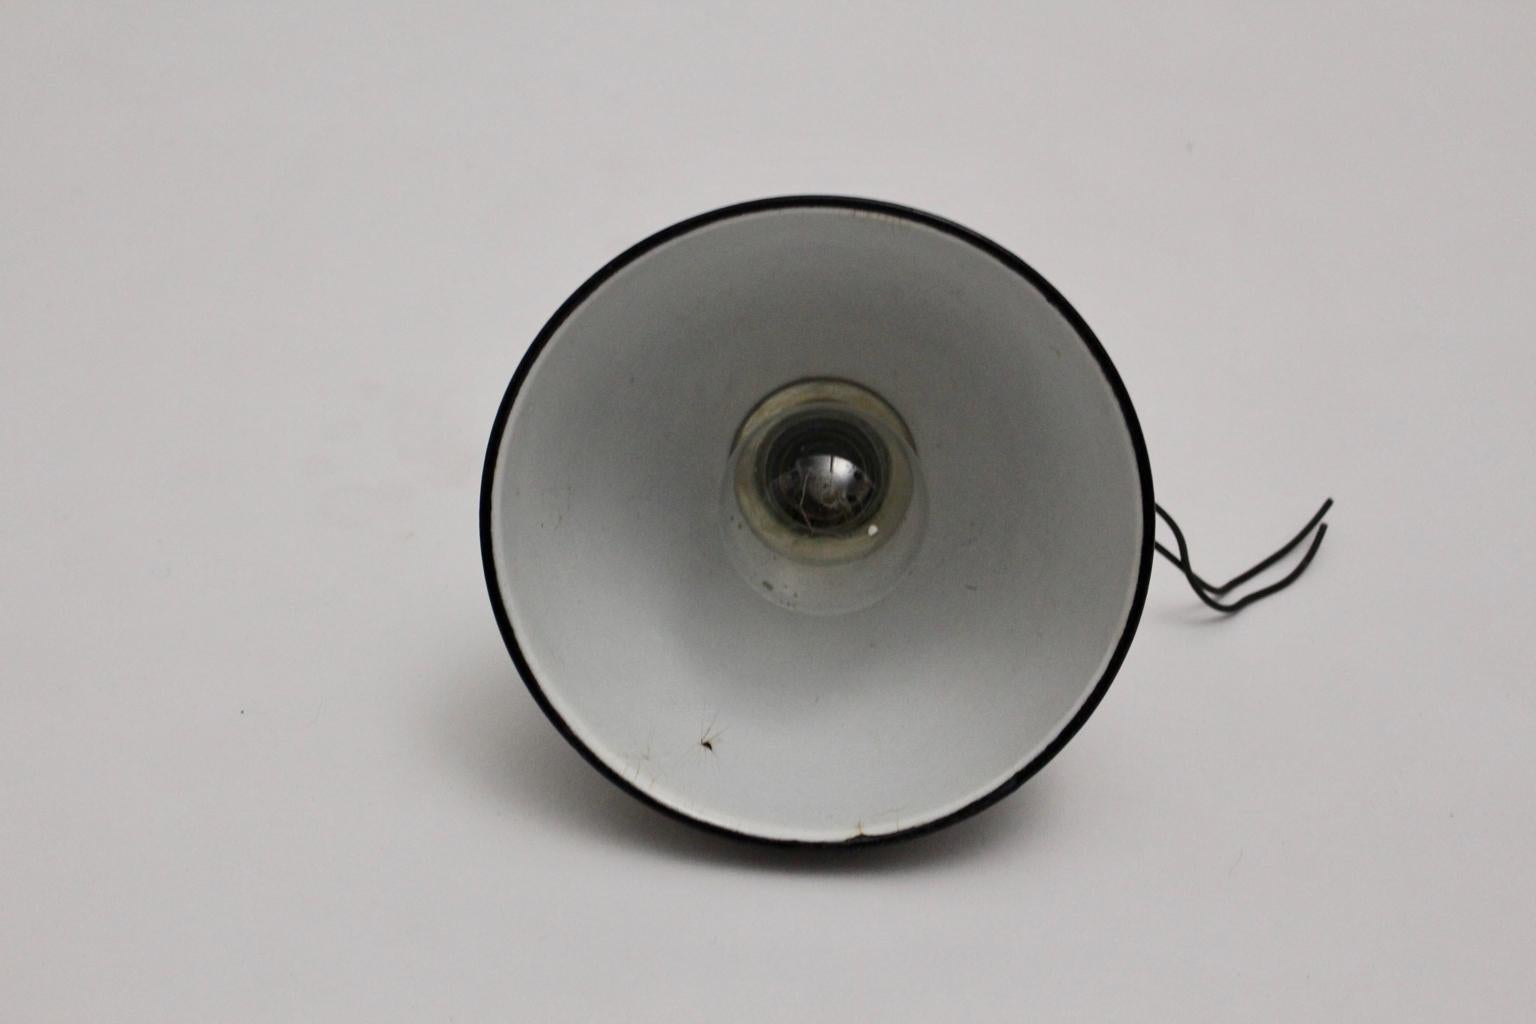 Bauhaus Vintage Black and White Email Hanging Lamp, 1920s, Germany For Sale 1